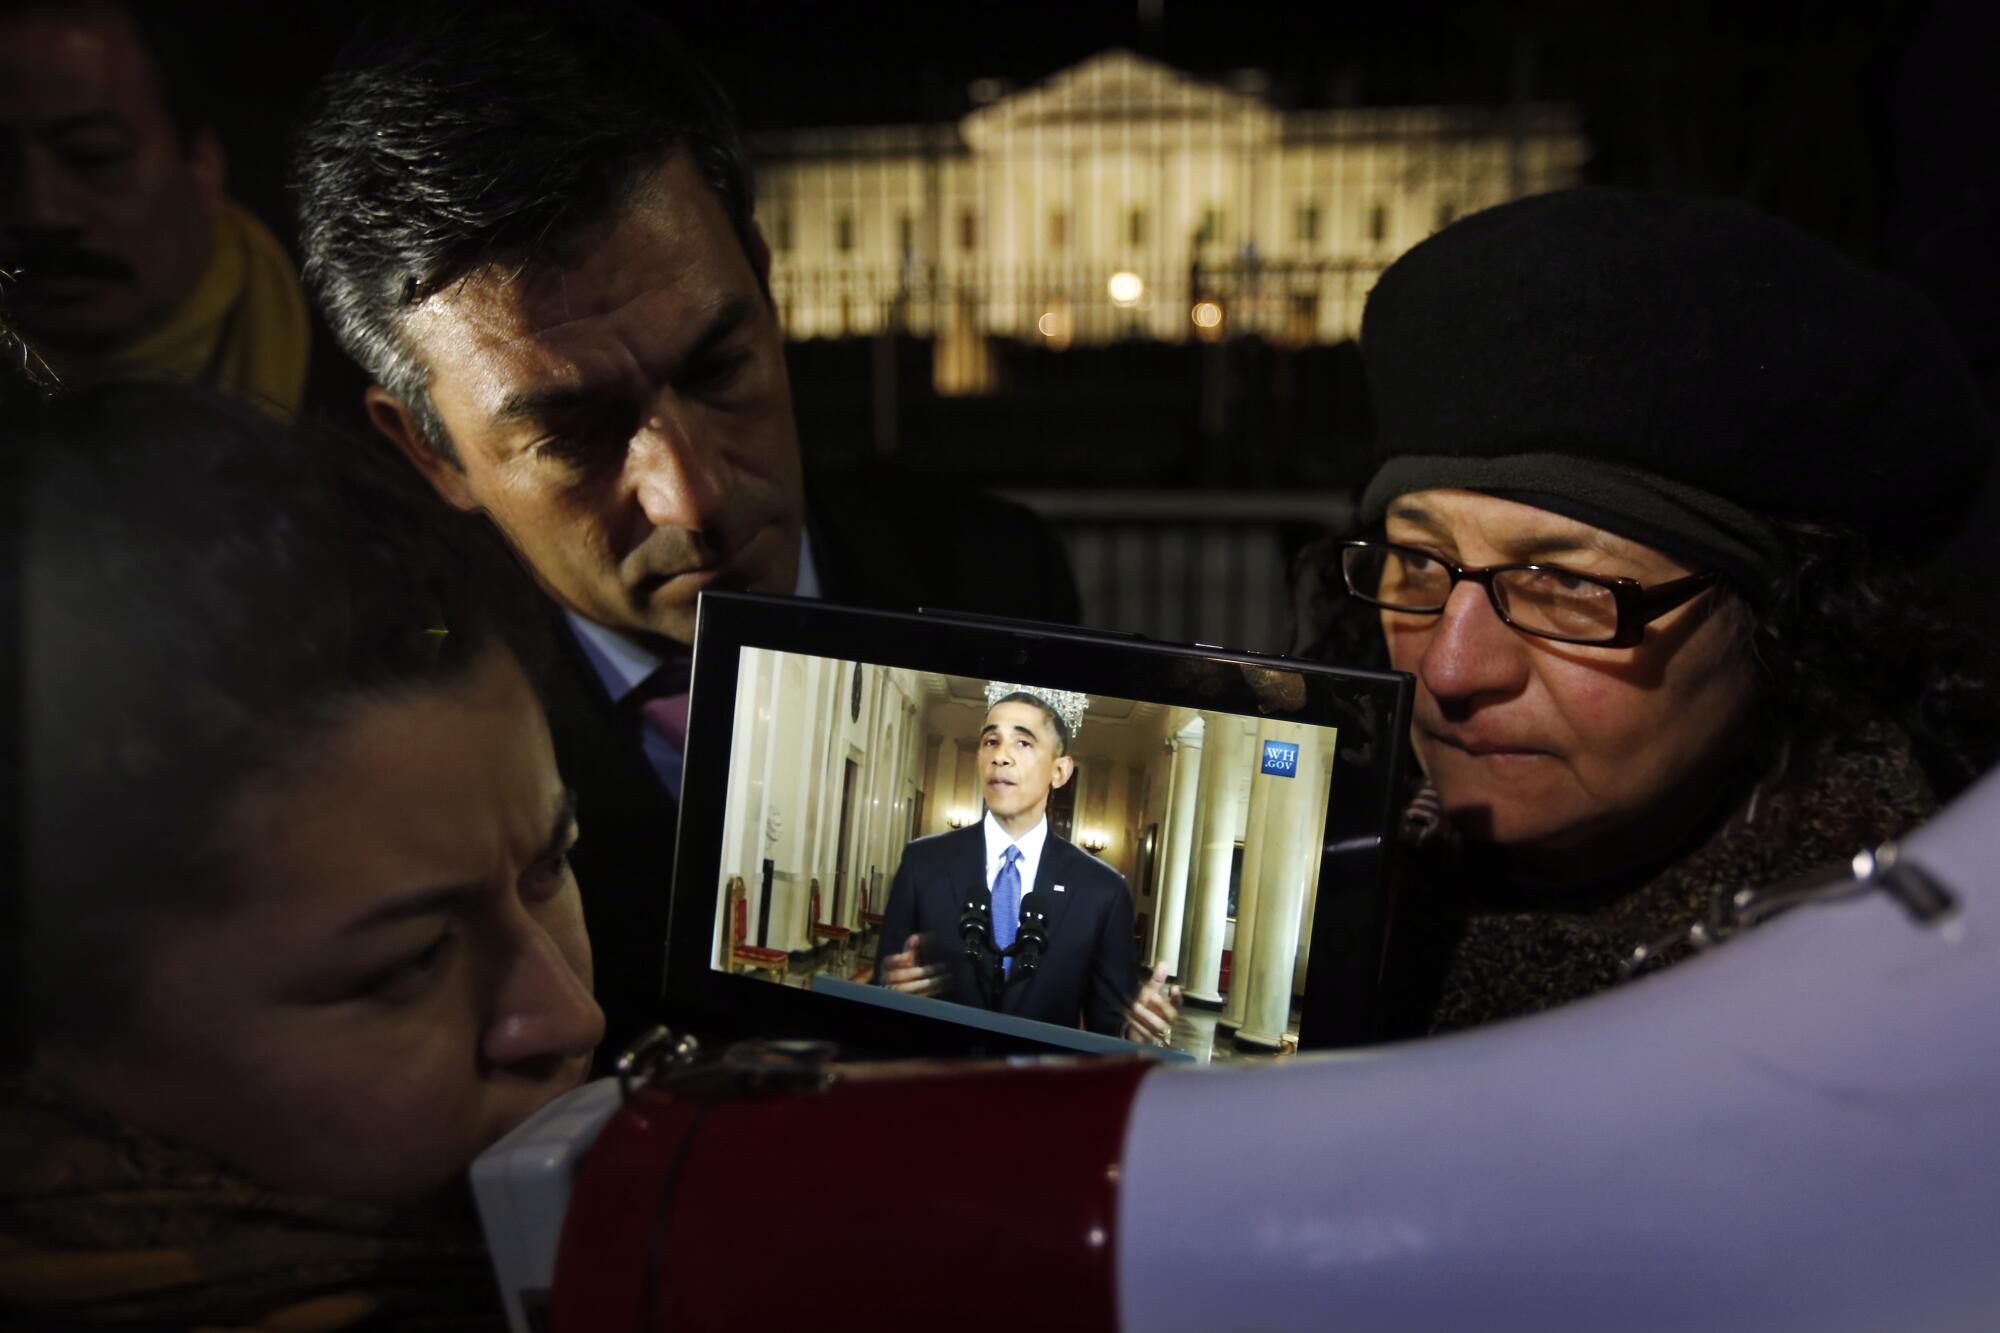 A person uses a megaphone outside the White House after dark as others watch a small screen showing President Obama speaking.